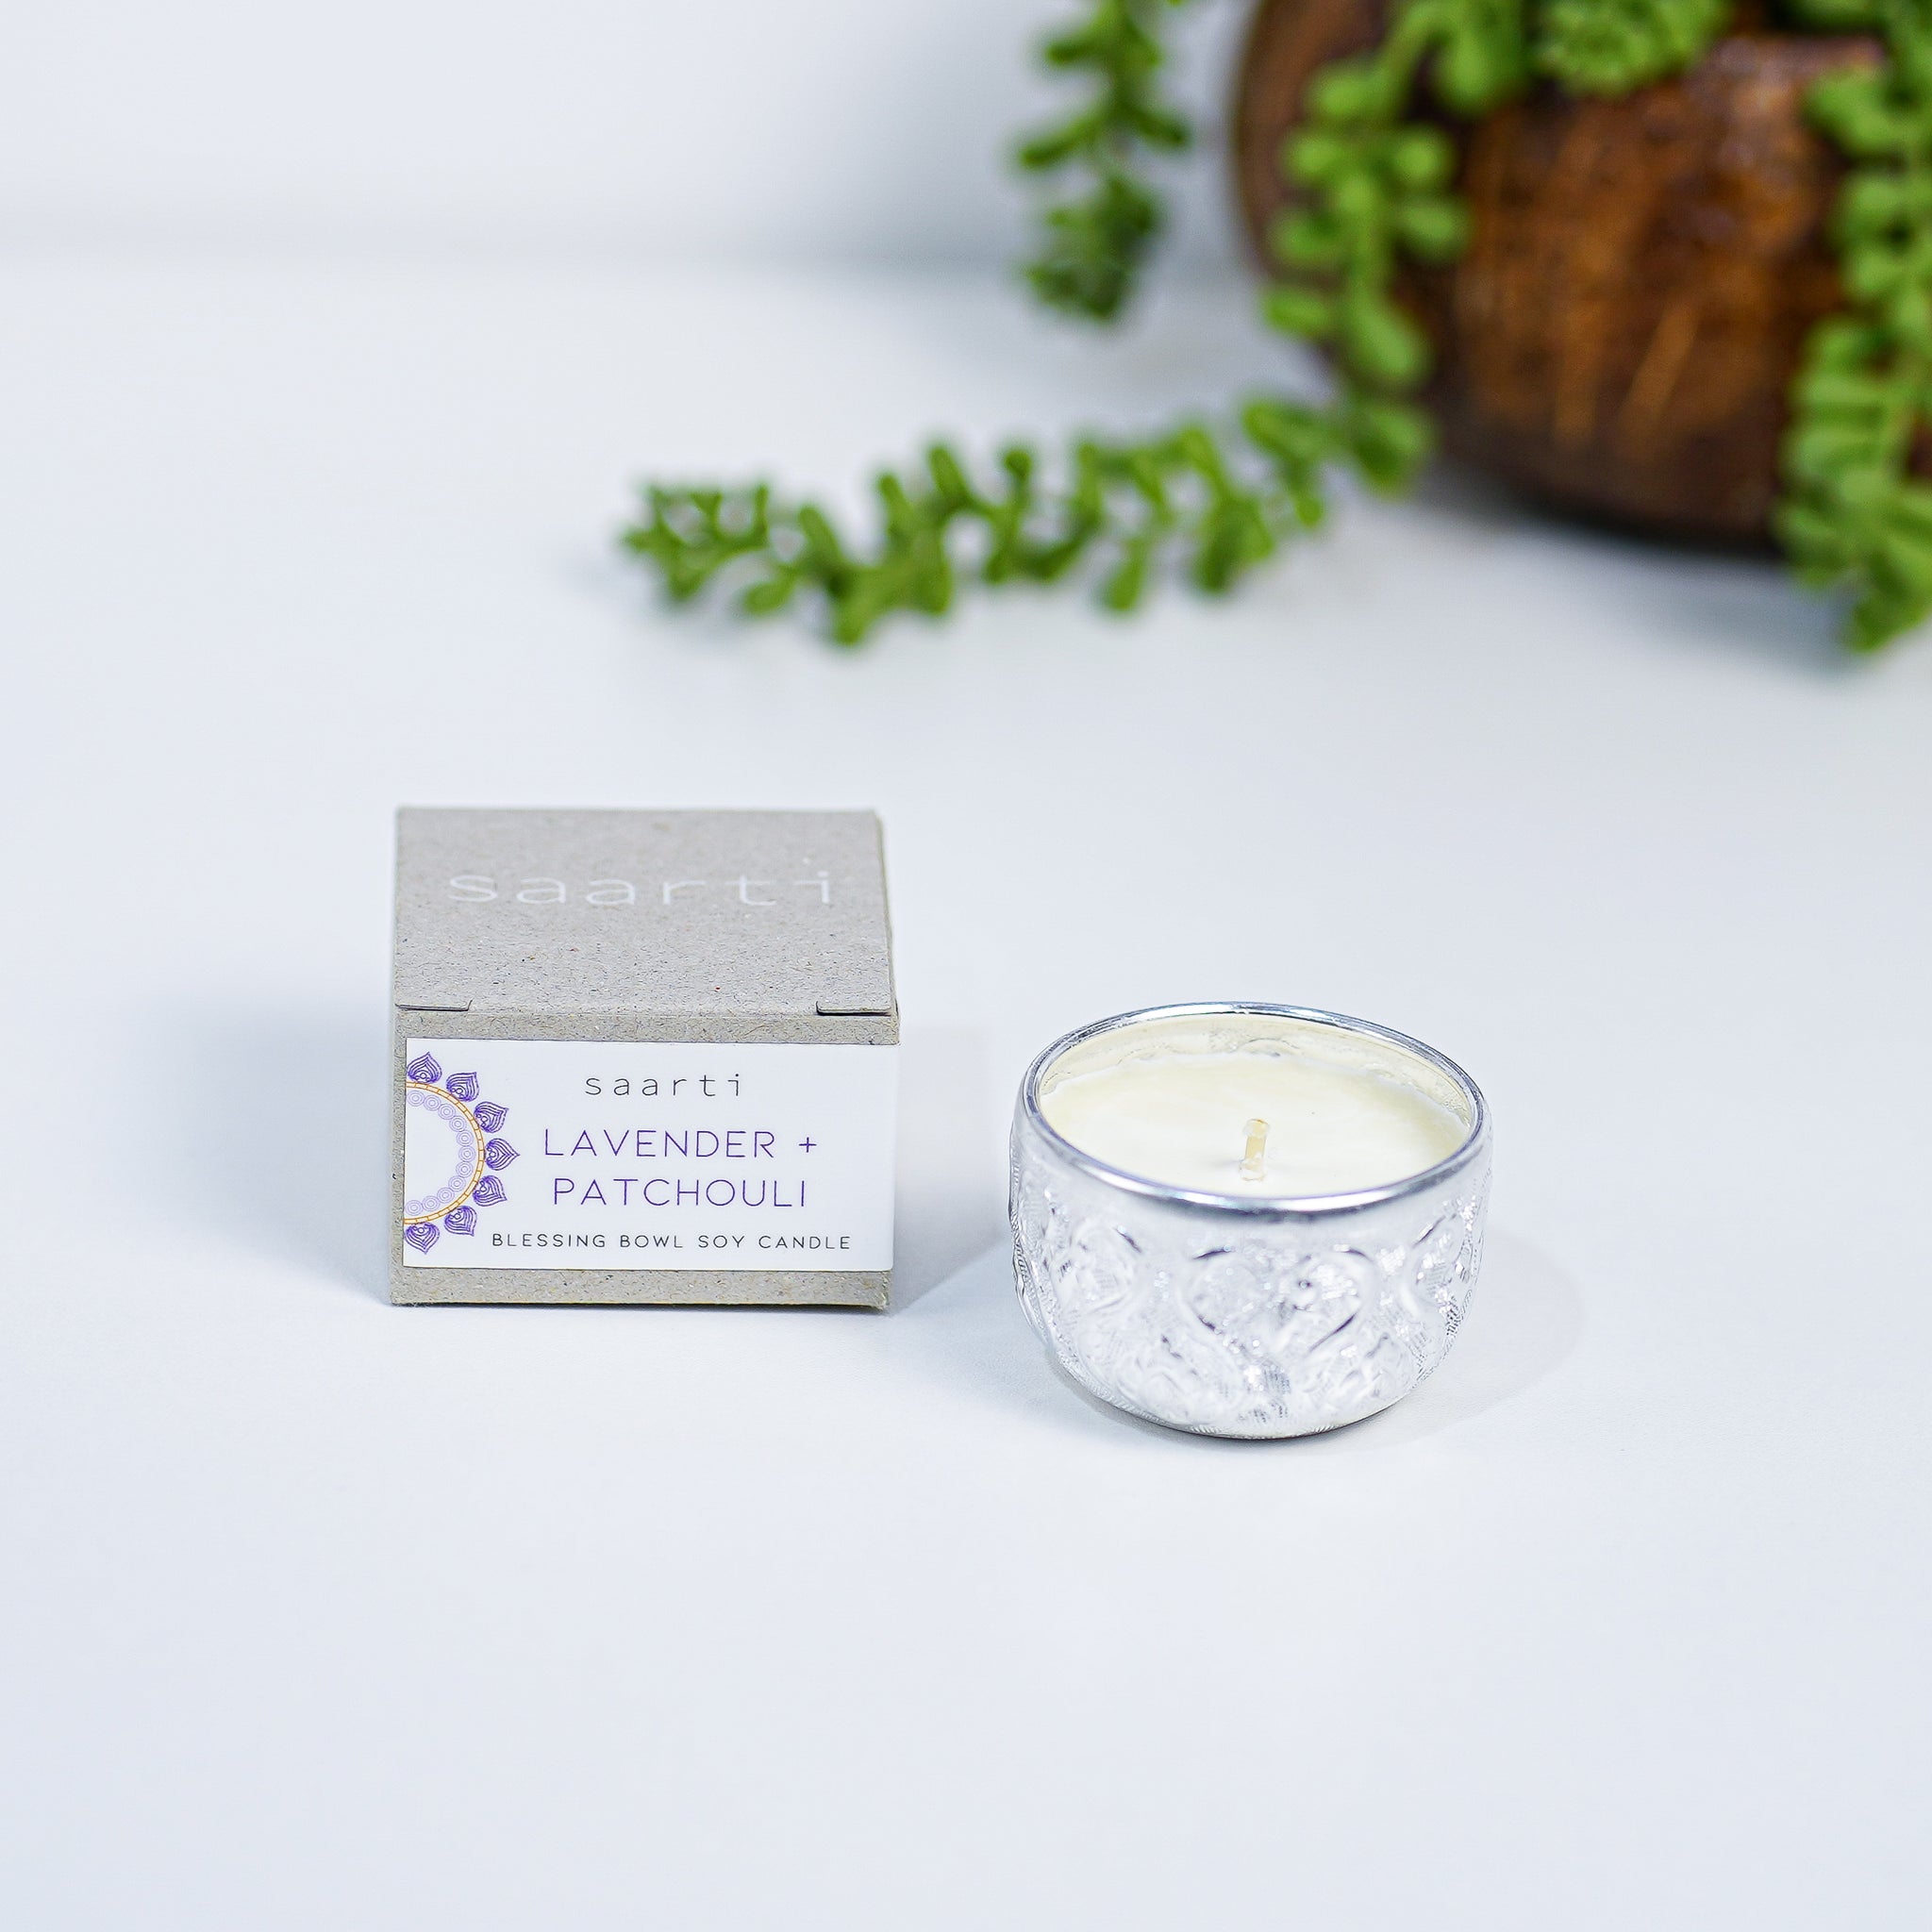 Fill your home with our beautiful Blessing Bowl candle, hand poured with pure soy wax and scented with essential oils of lavender and patchouli..